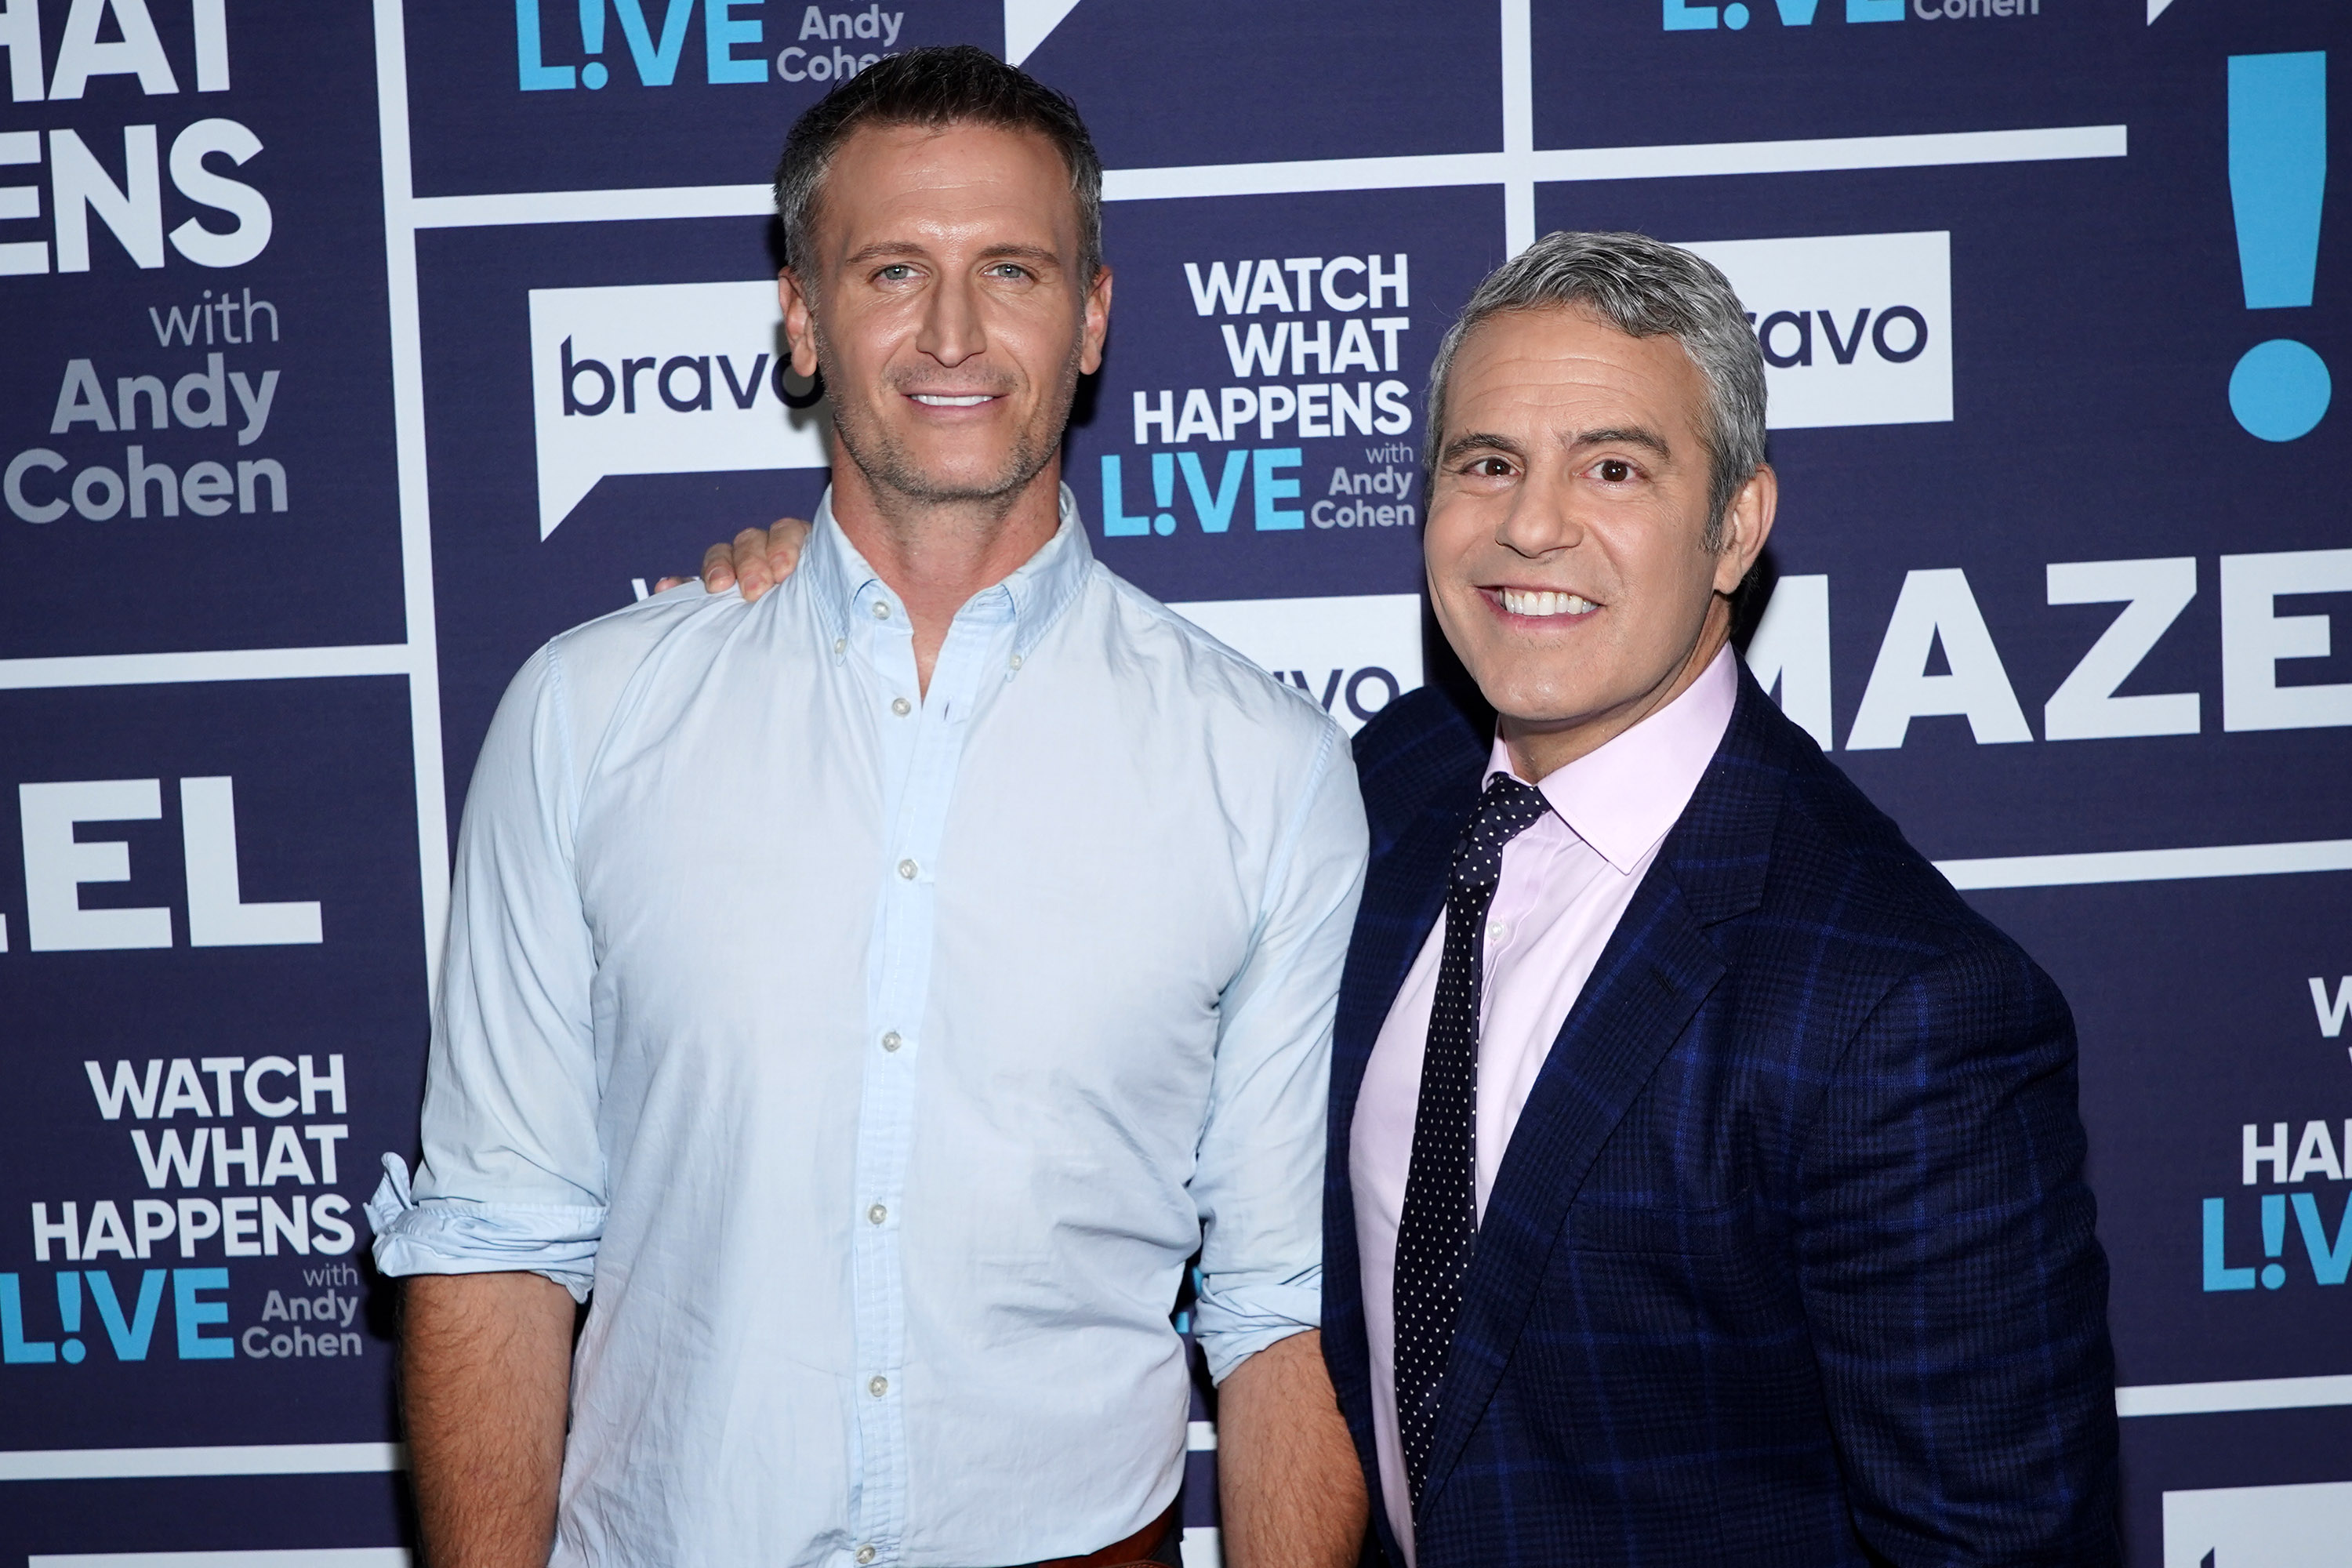 John Hill and Andy Cohen on season 18 of "Watch What Happens Live With Andy Cohen" on November 2, 2021 | Source: Getty Images